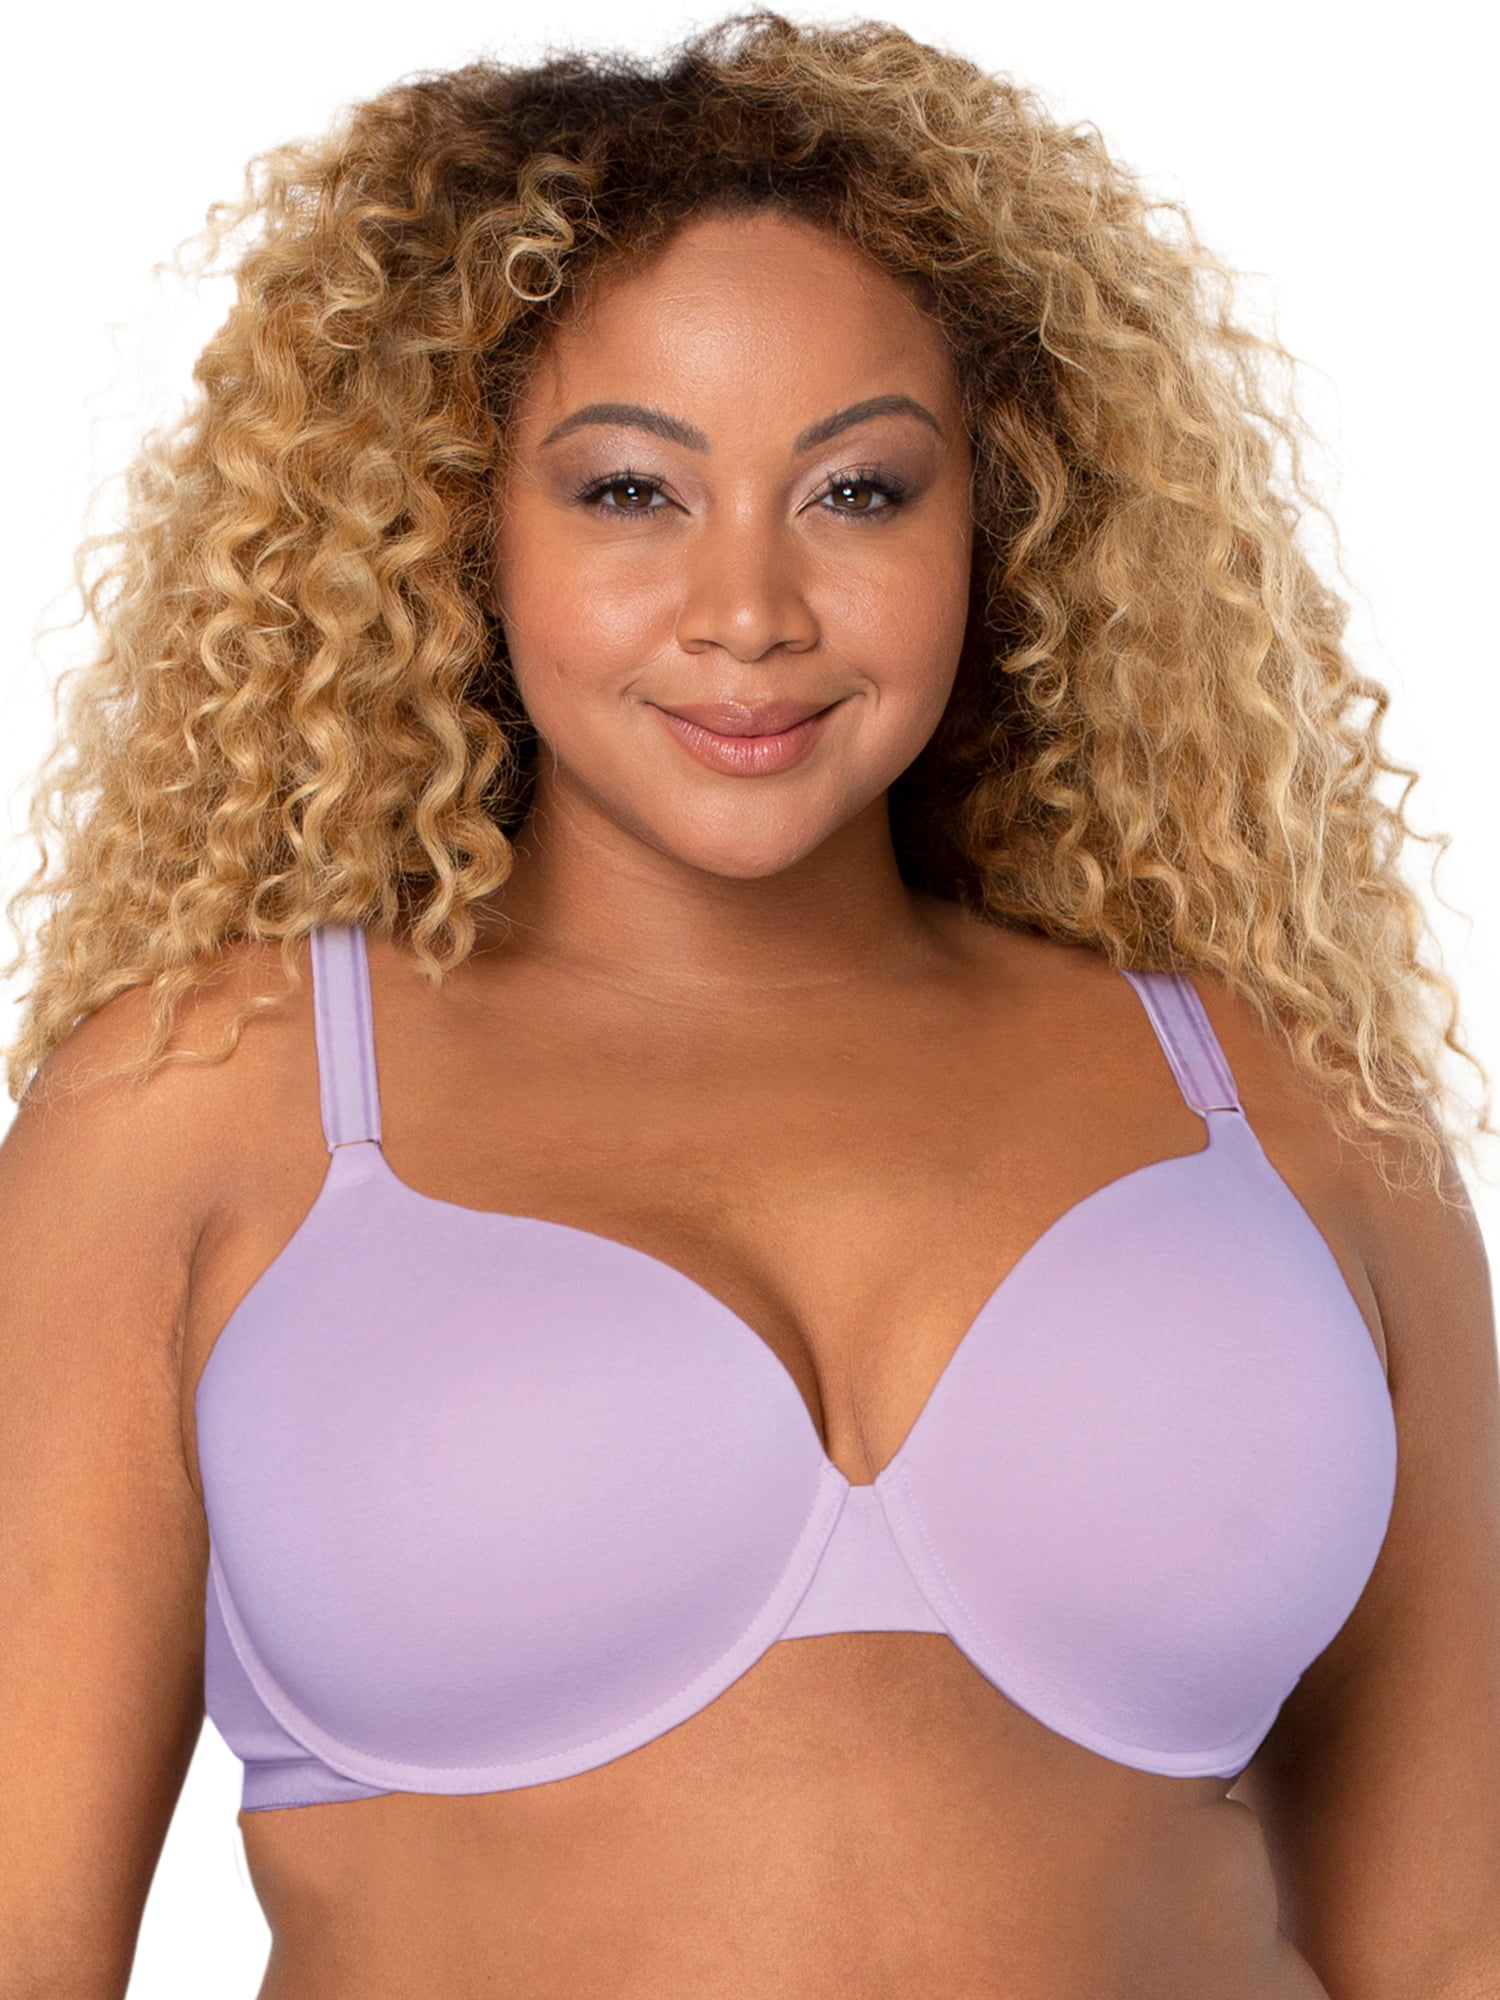 2 Brand New Molke bras sizes S Super and 28 J/JJ - $45 each and free USPS  flat rate shipping if you buy both of them : r/braswap